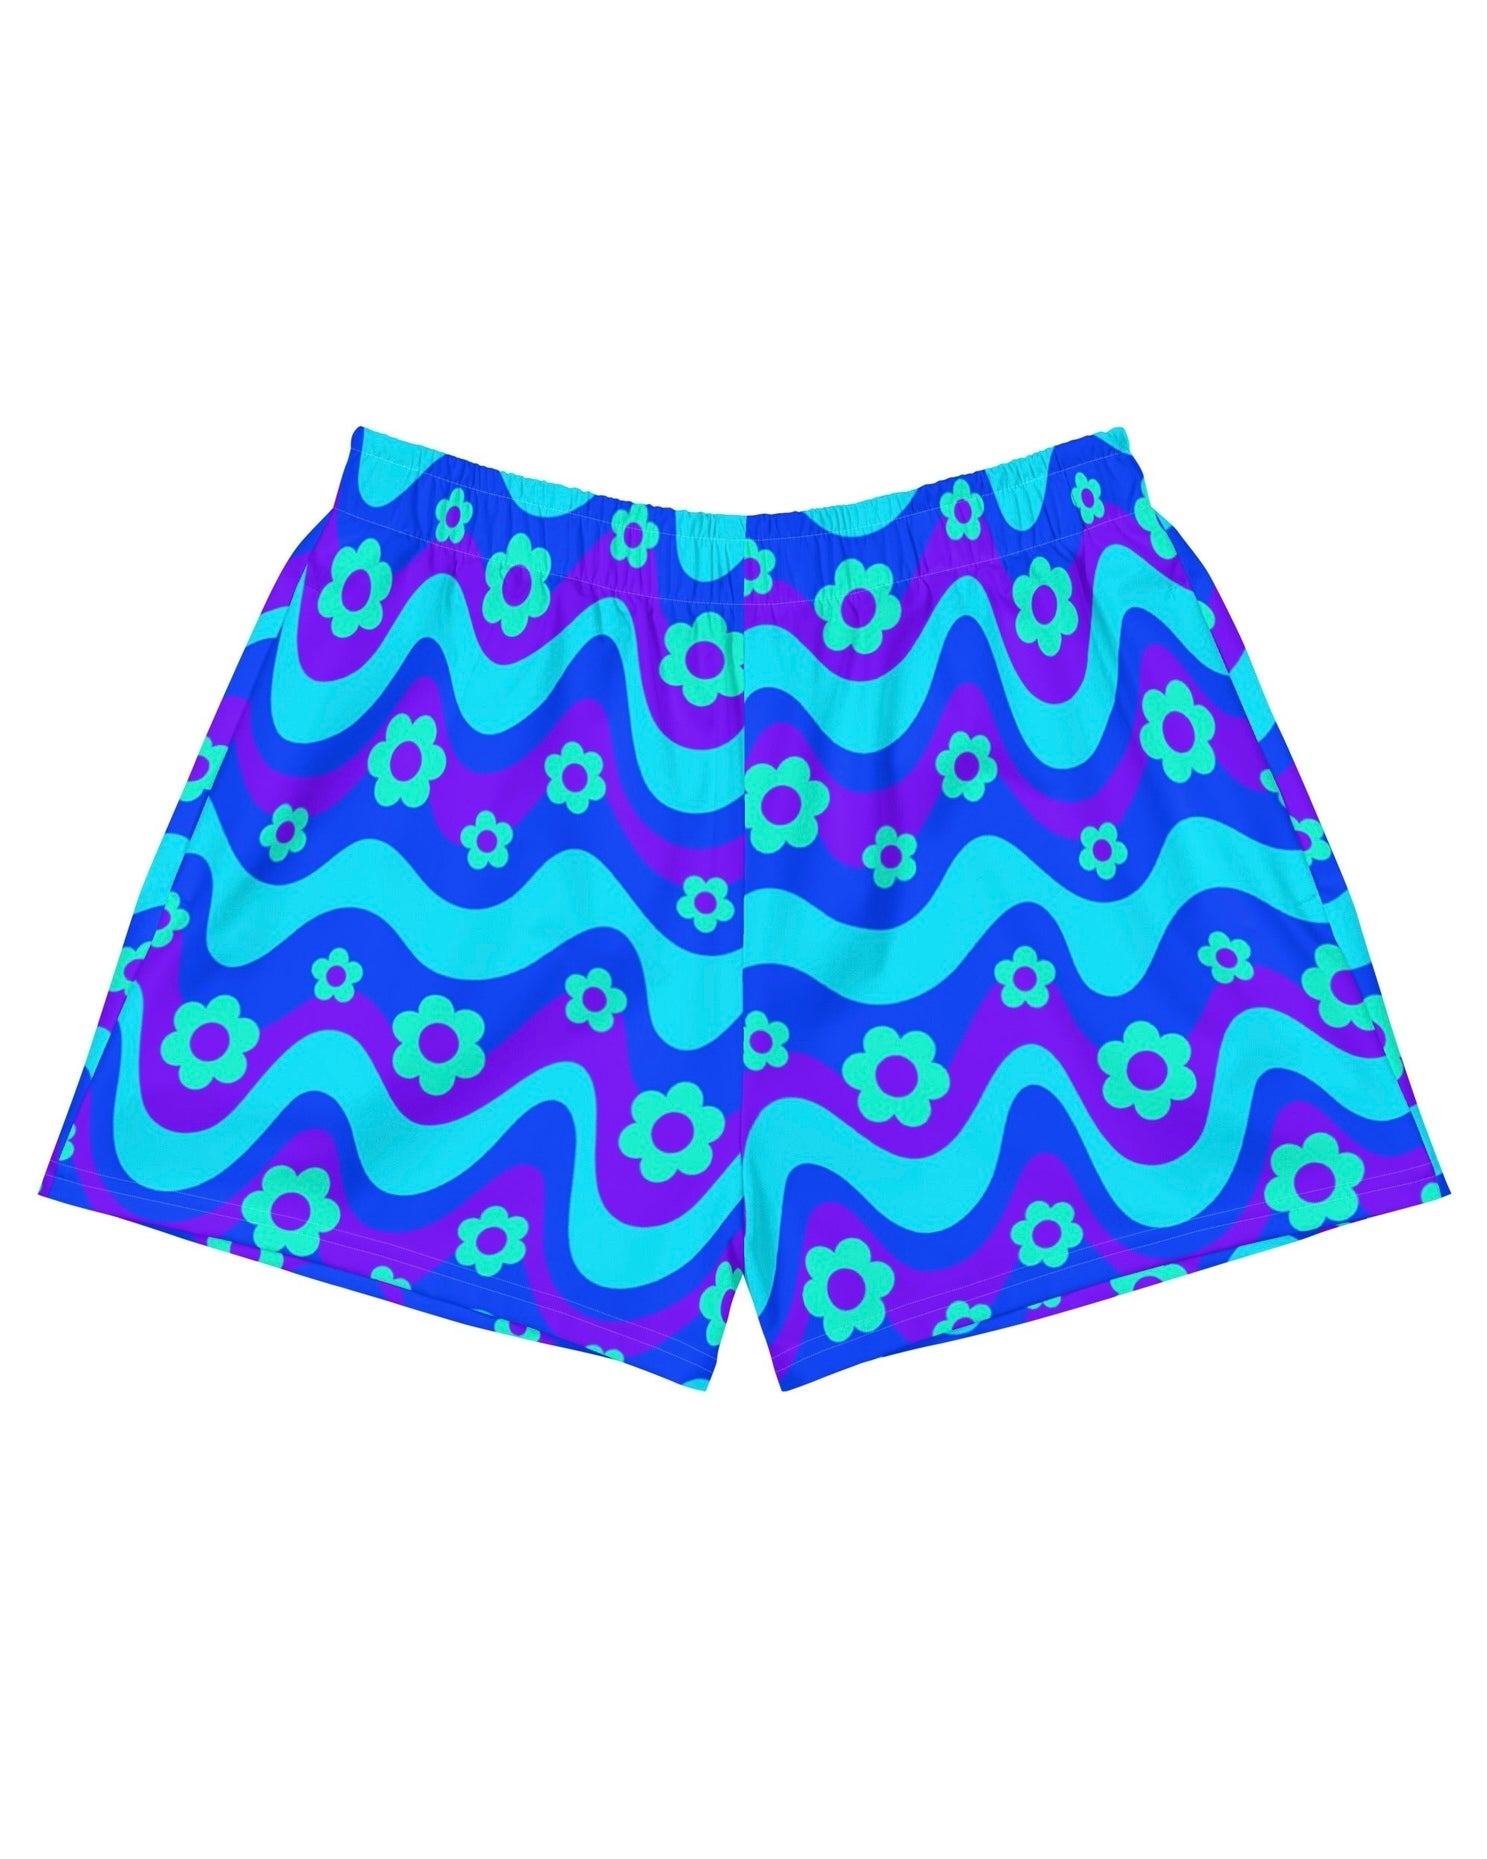 Flower Power Blue Recycled Shorts, Athletic Shorts, - One Stop Rave